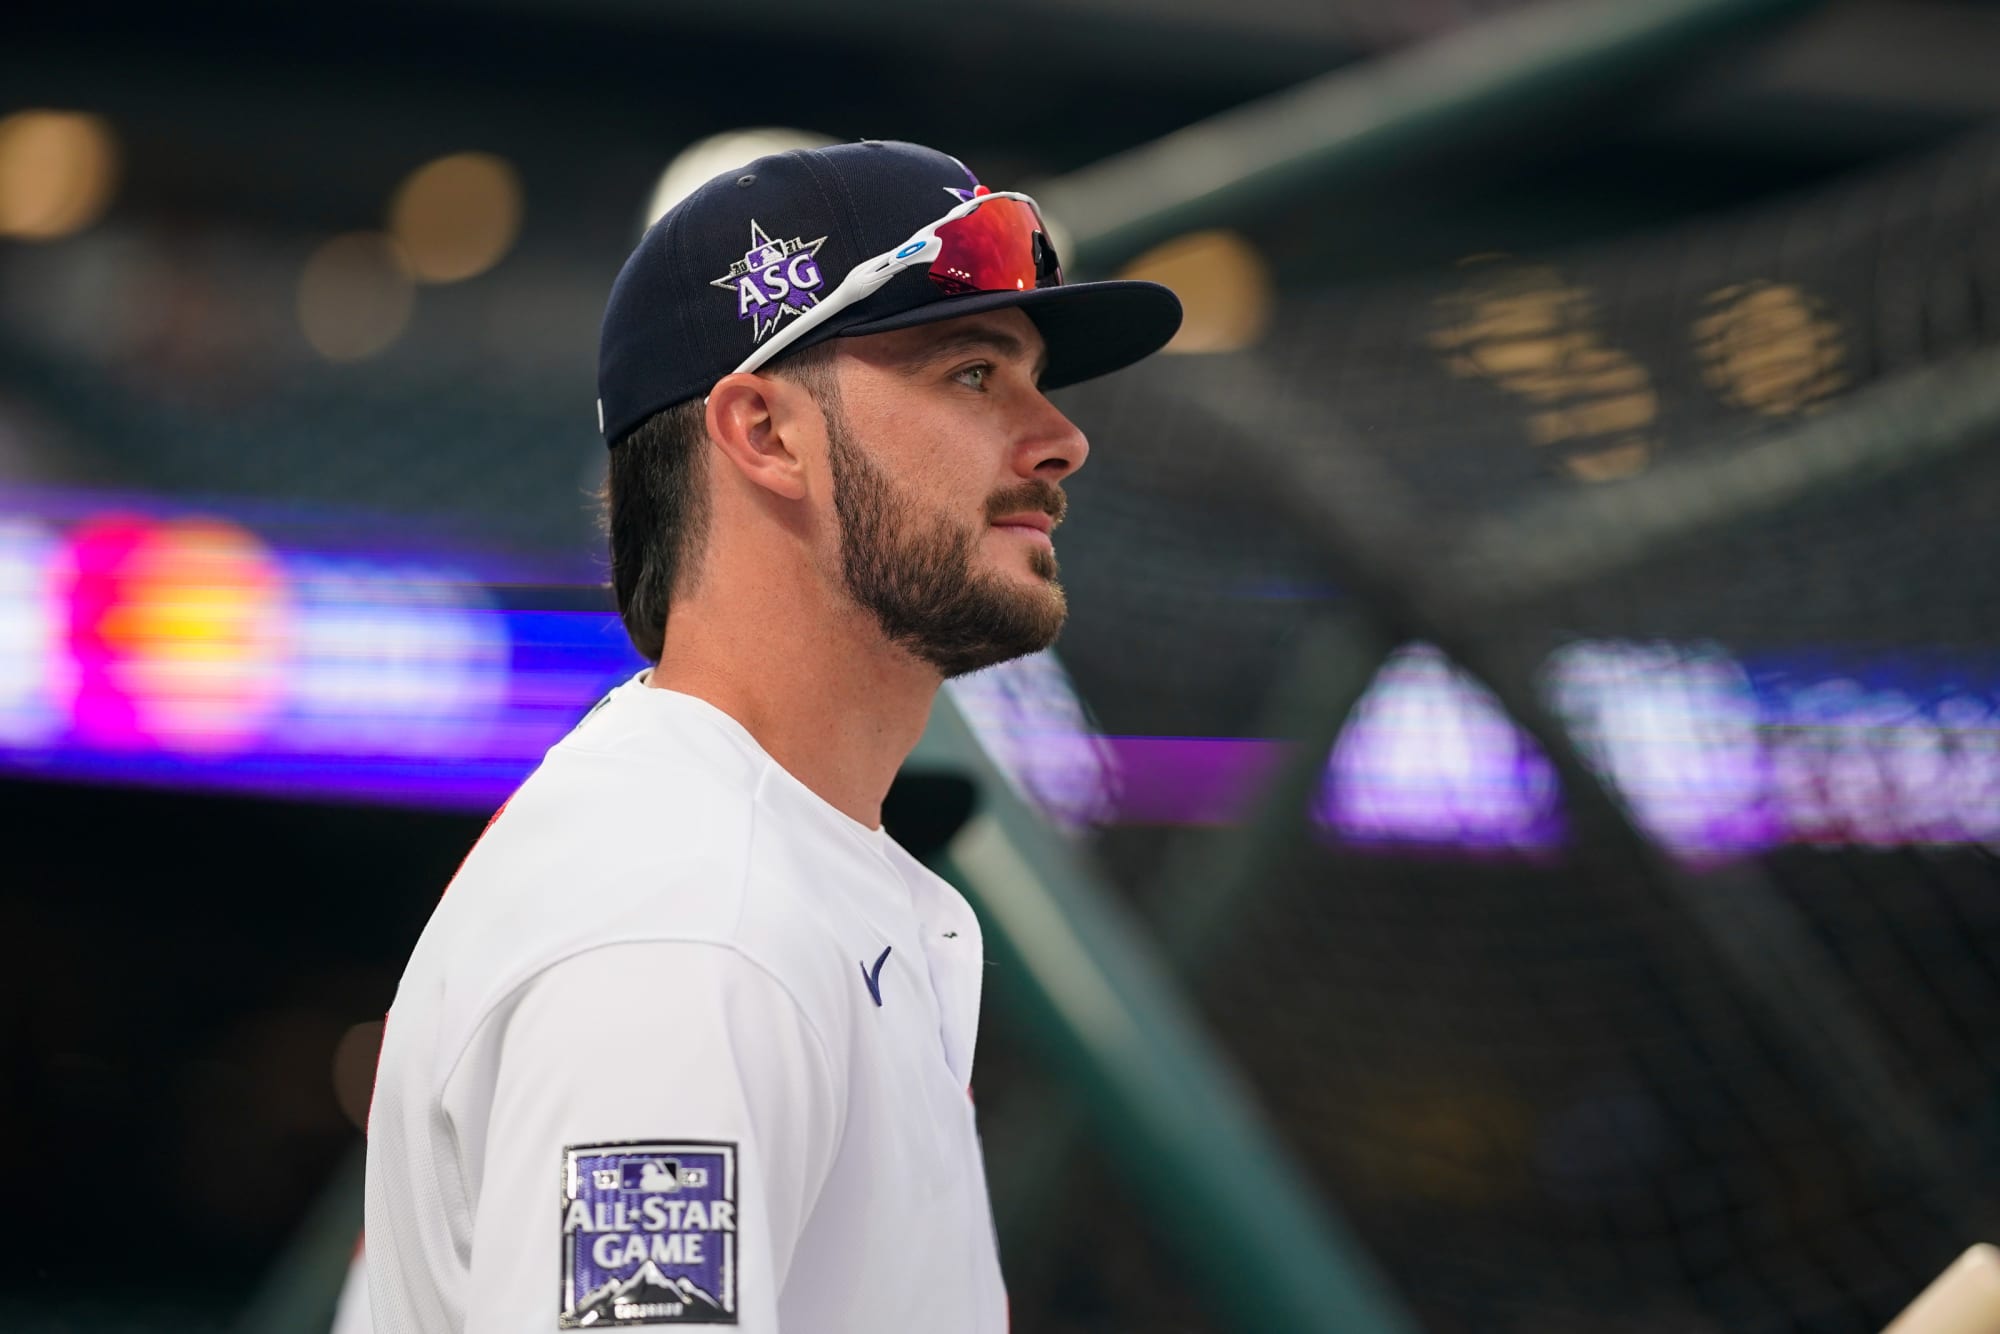 2021 All-Star Game thoughts: Awful uniforms, Kris Bryant, fast pace of play  - Bleed Cubbie Blue